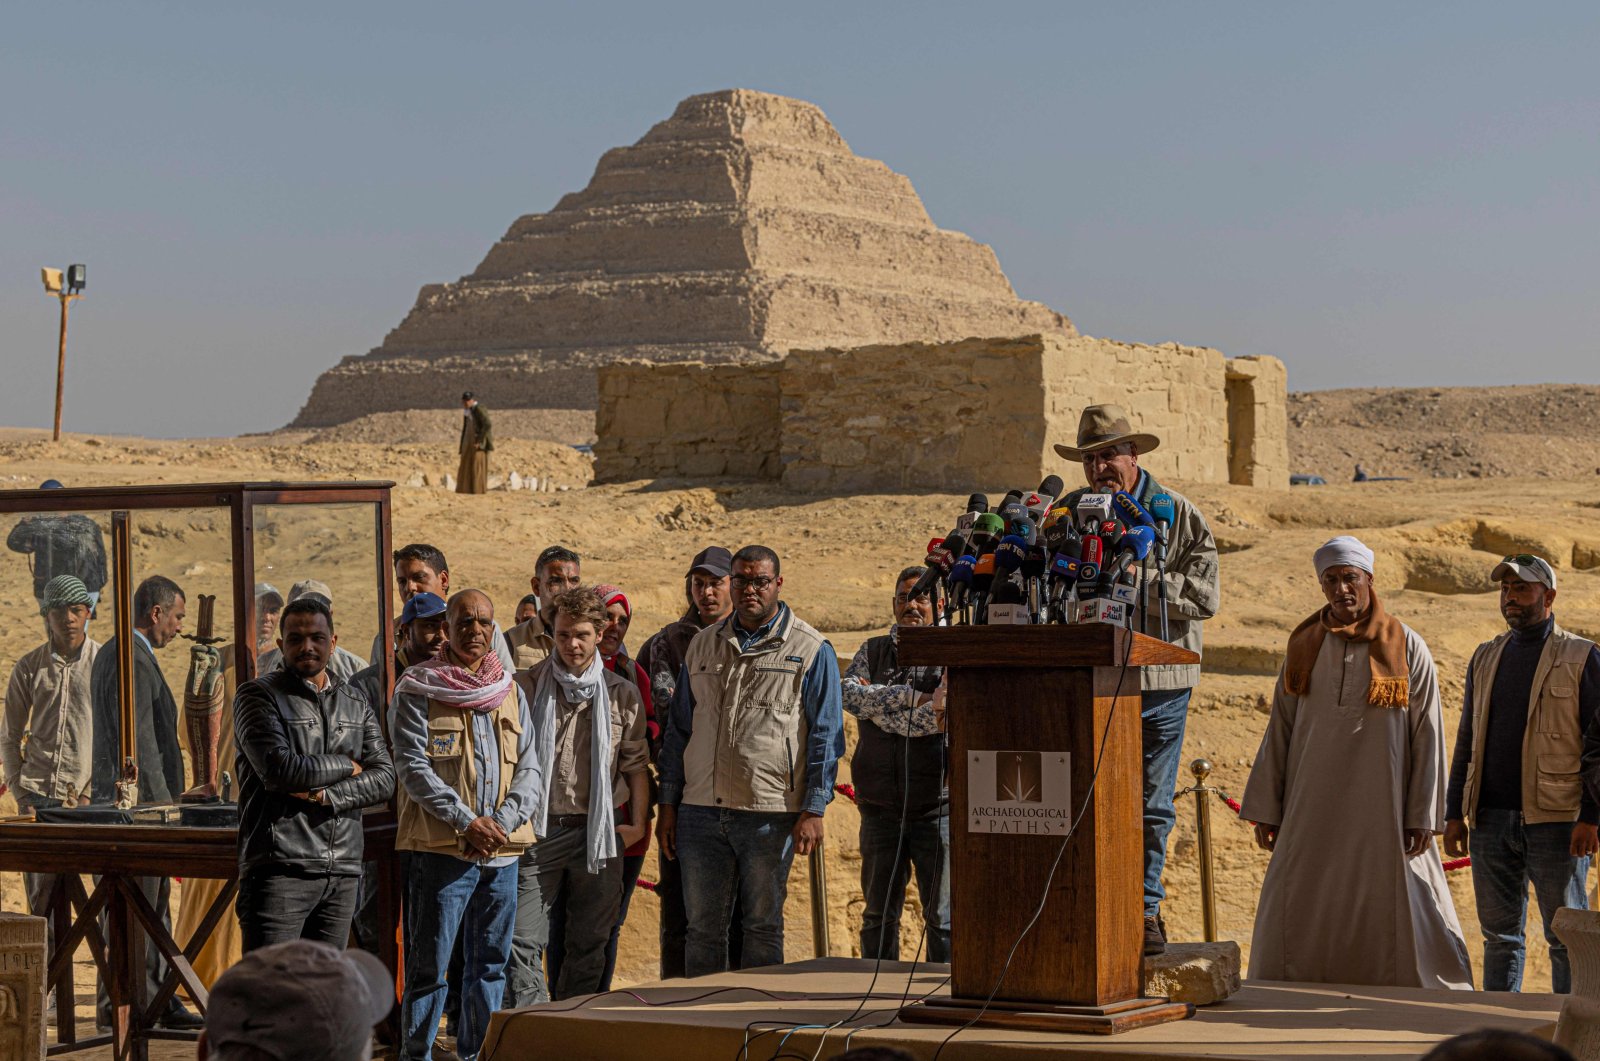 Archaeologist and Egypt&#039;s former antiquities minister Zahi Hawass holds a press conference in the Saqqara necropolis, where a gold-laced mummy and four tombs including of an ancient king&#039;s "secret keeper" were discovered, south of Cairo on Jan. 26, 2023. (AFP Photo)